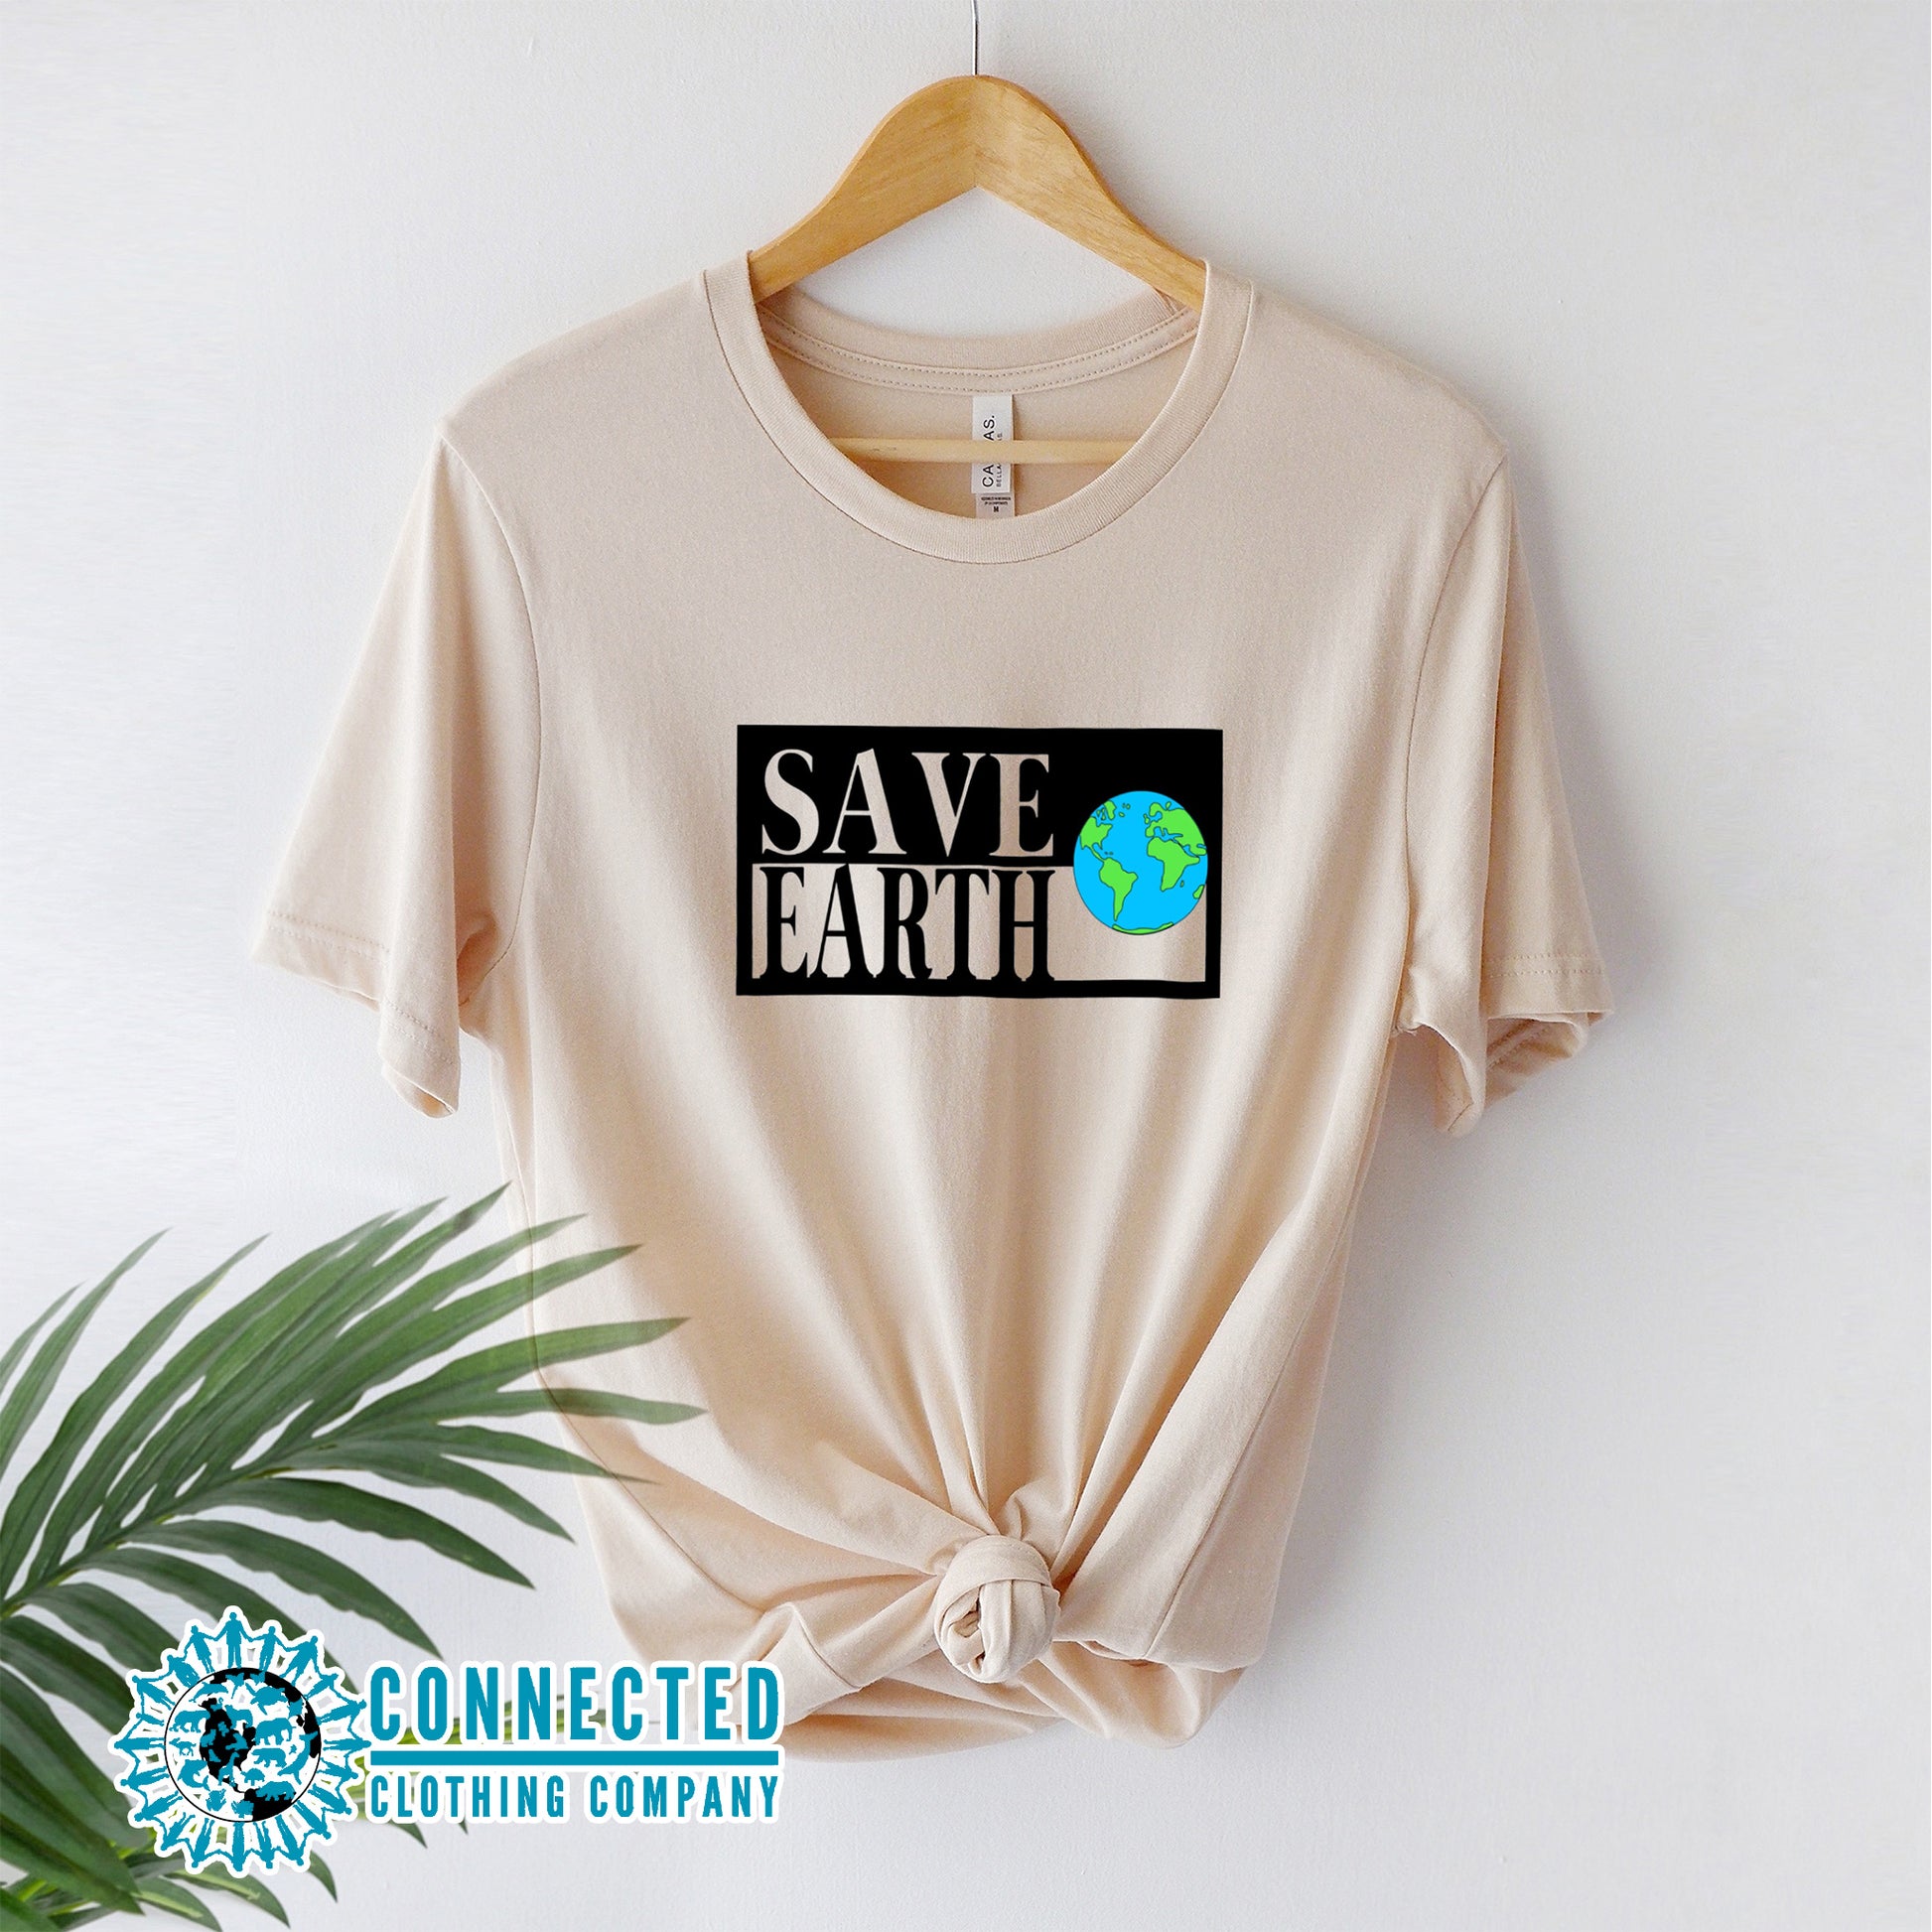 Soft Cream Save Earth Short-Sleeve T-shirt - Connected Clothing Company - Ethically and Sustainably Made - 50% donated to WIRES Wildlife Rescue